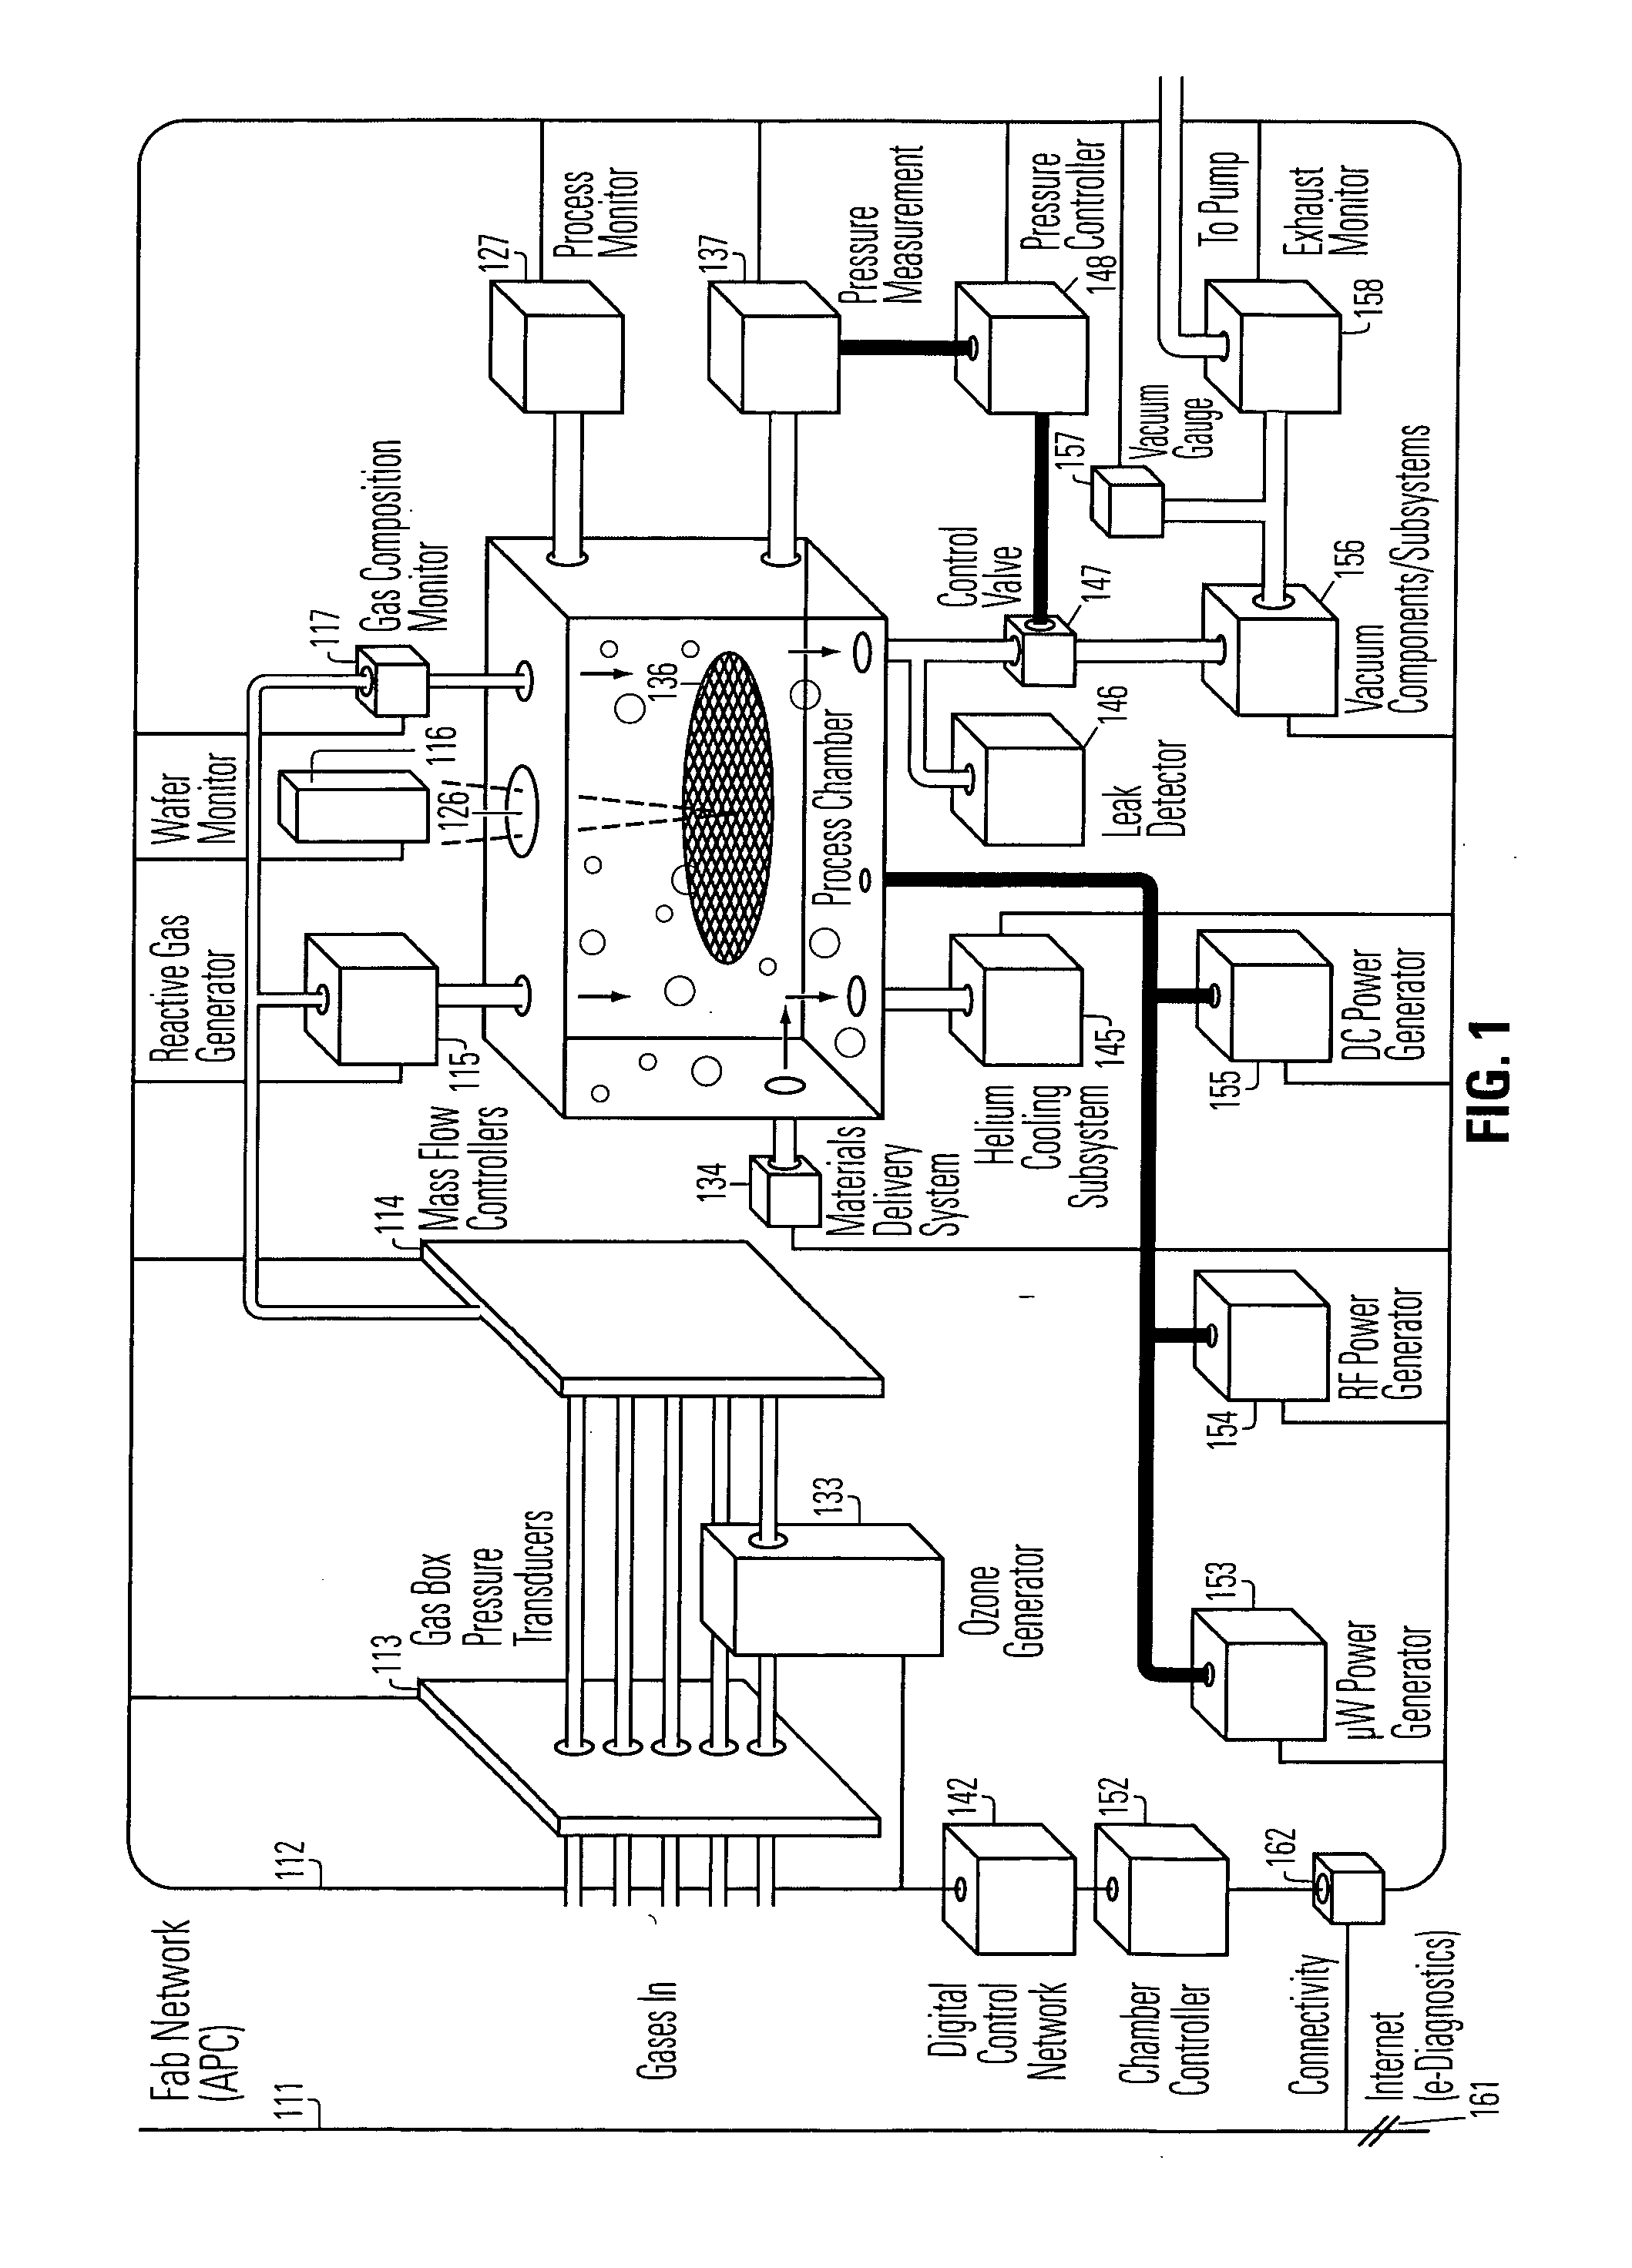 Versatile semiconductor manufacturing controller with statistically repeatable response times